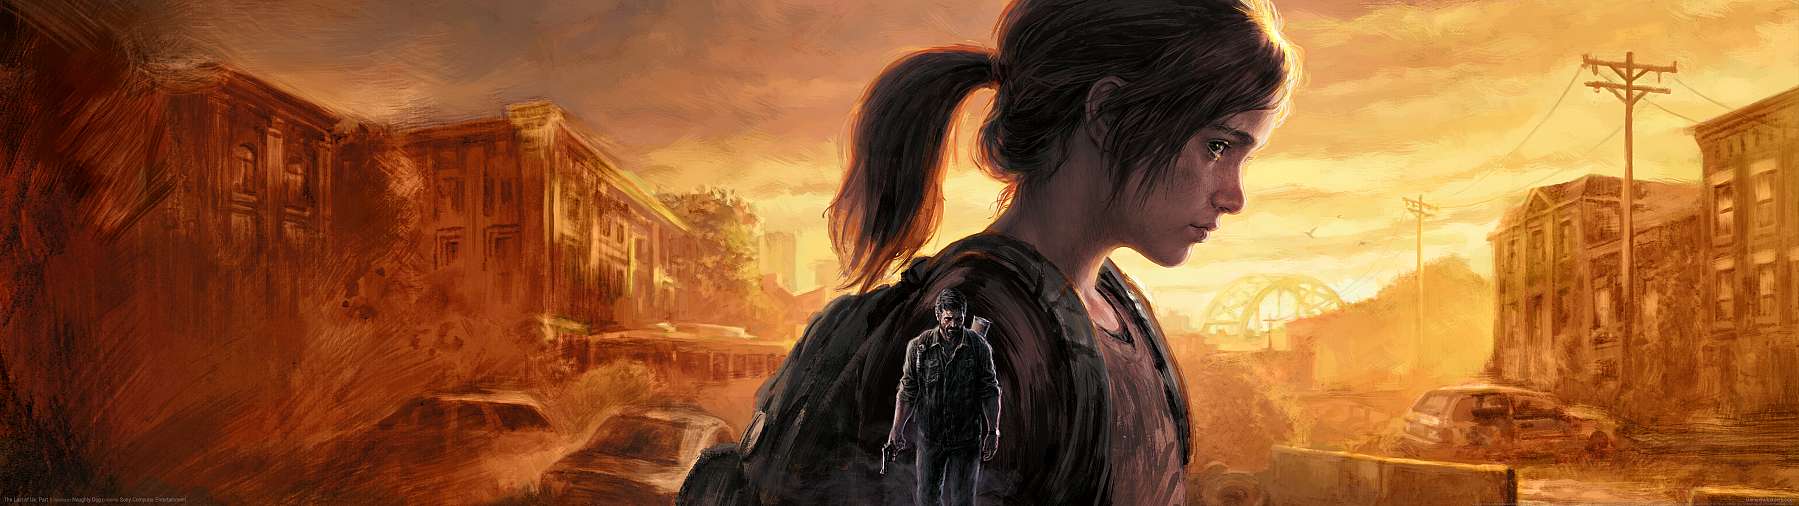 The Last of Us: Part 1 superwide achtergrond 01